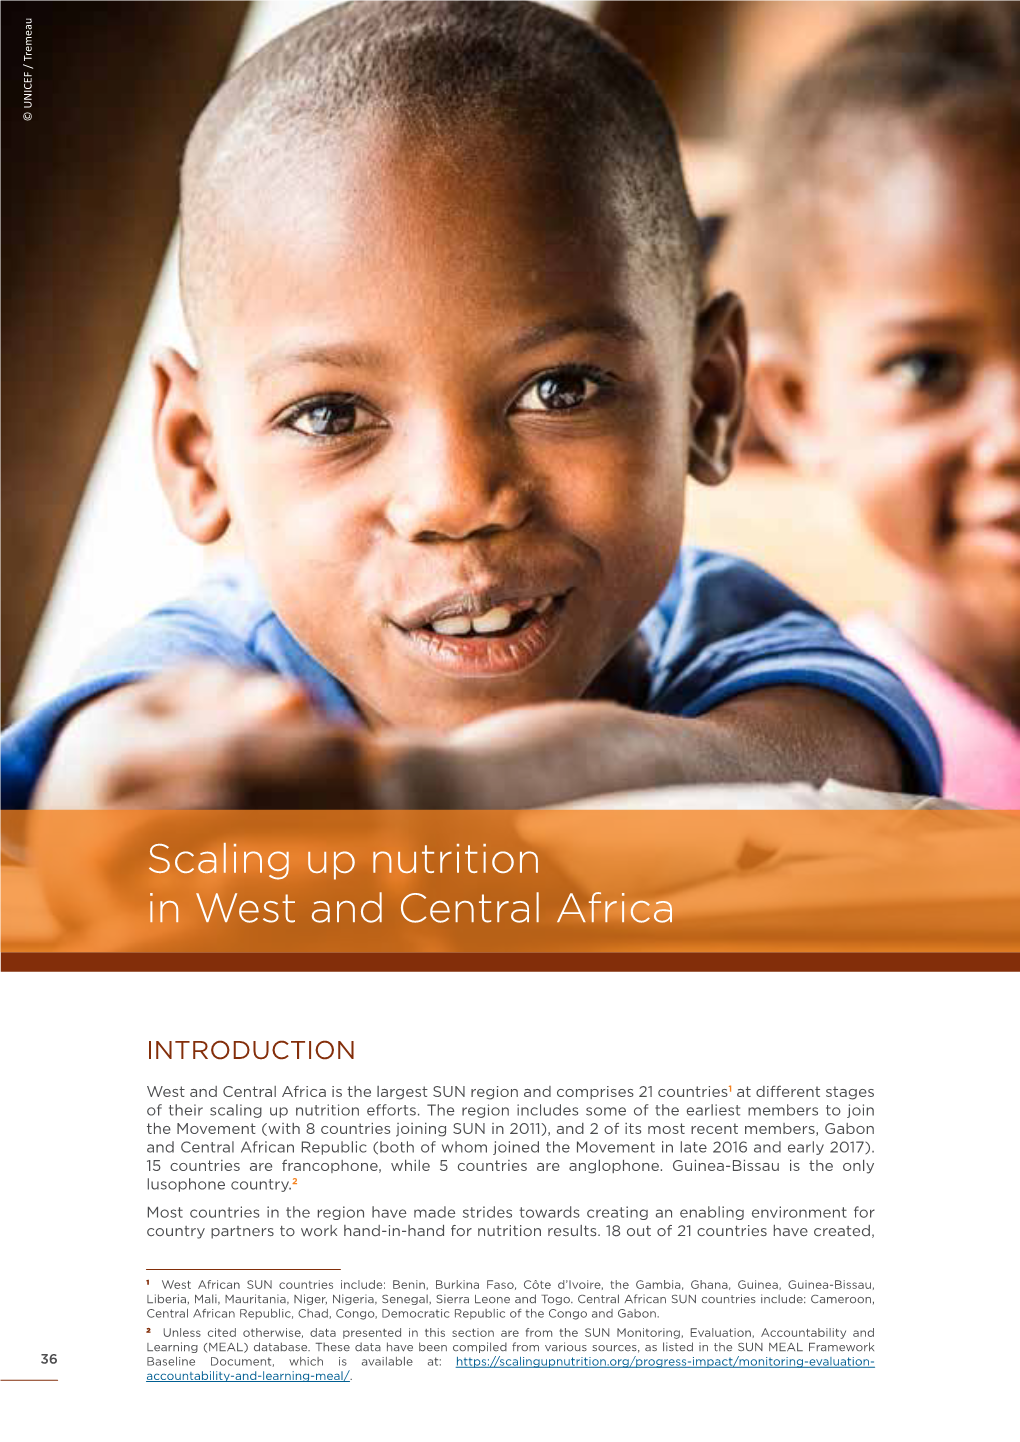 Scaling up Nutrition in West and Central Africa